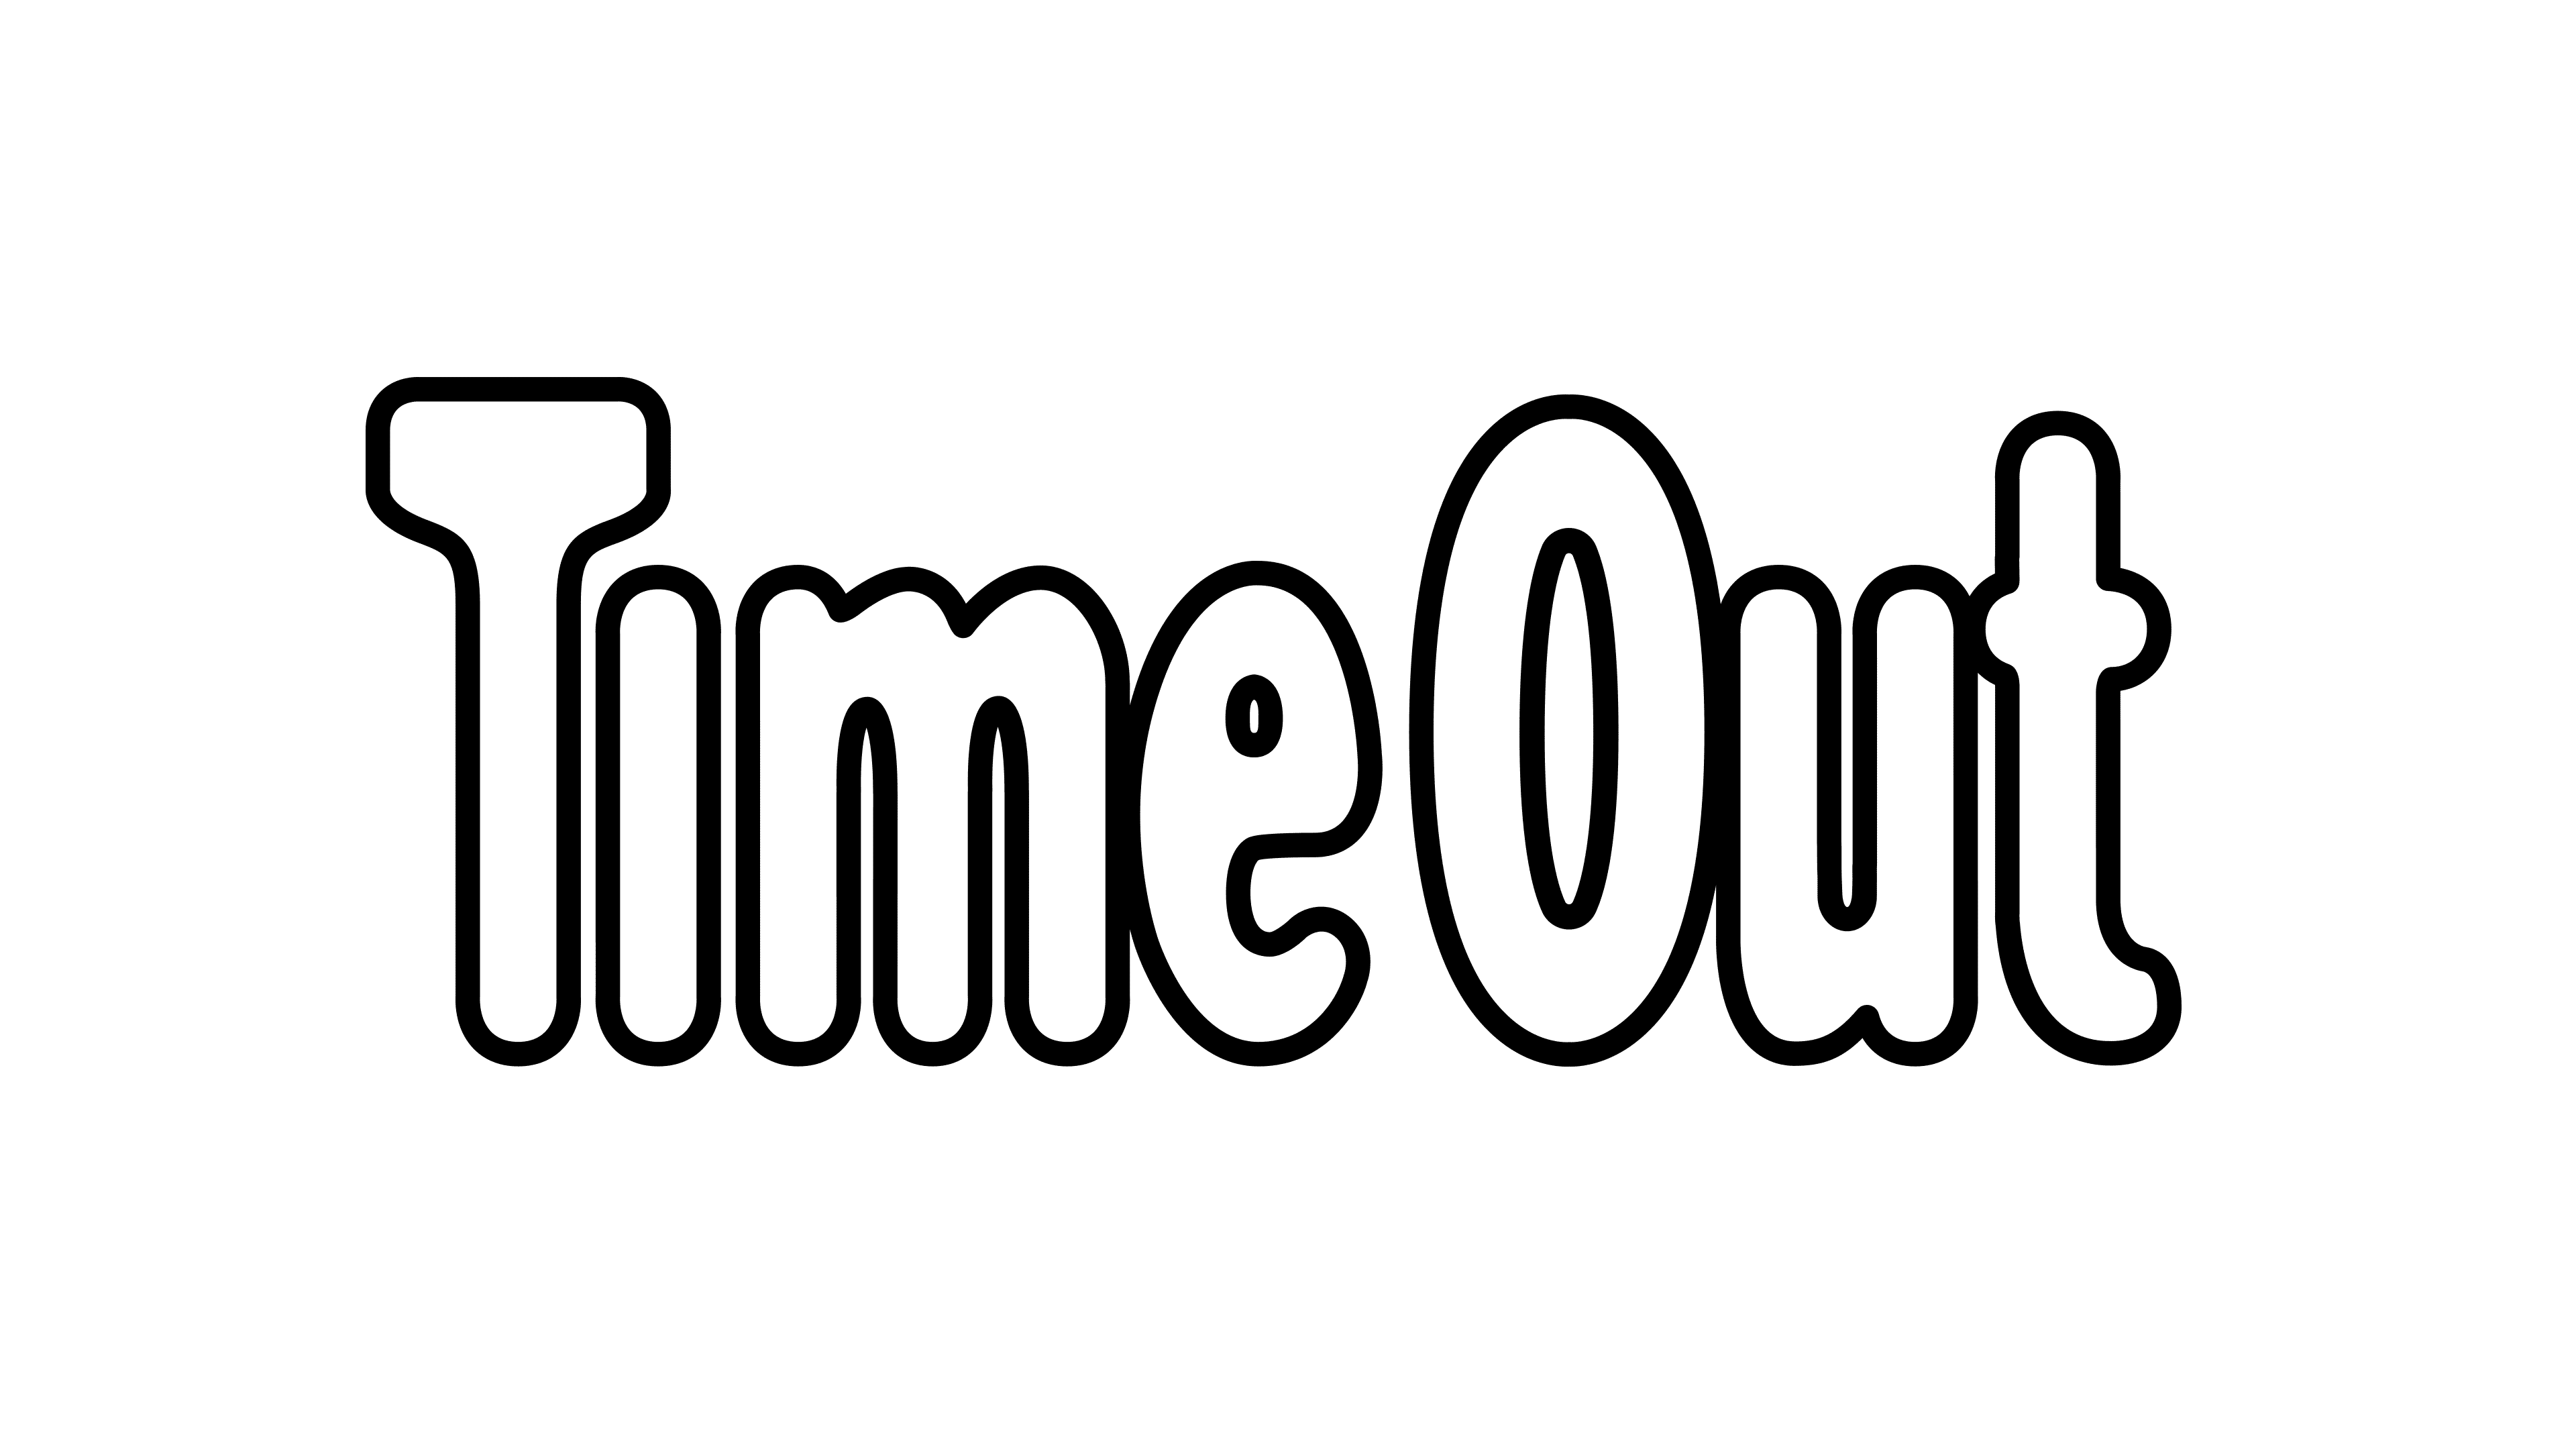 a black and white logo for timeout on a white background